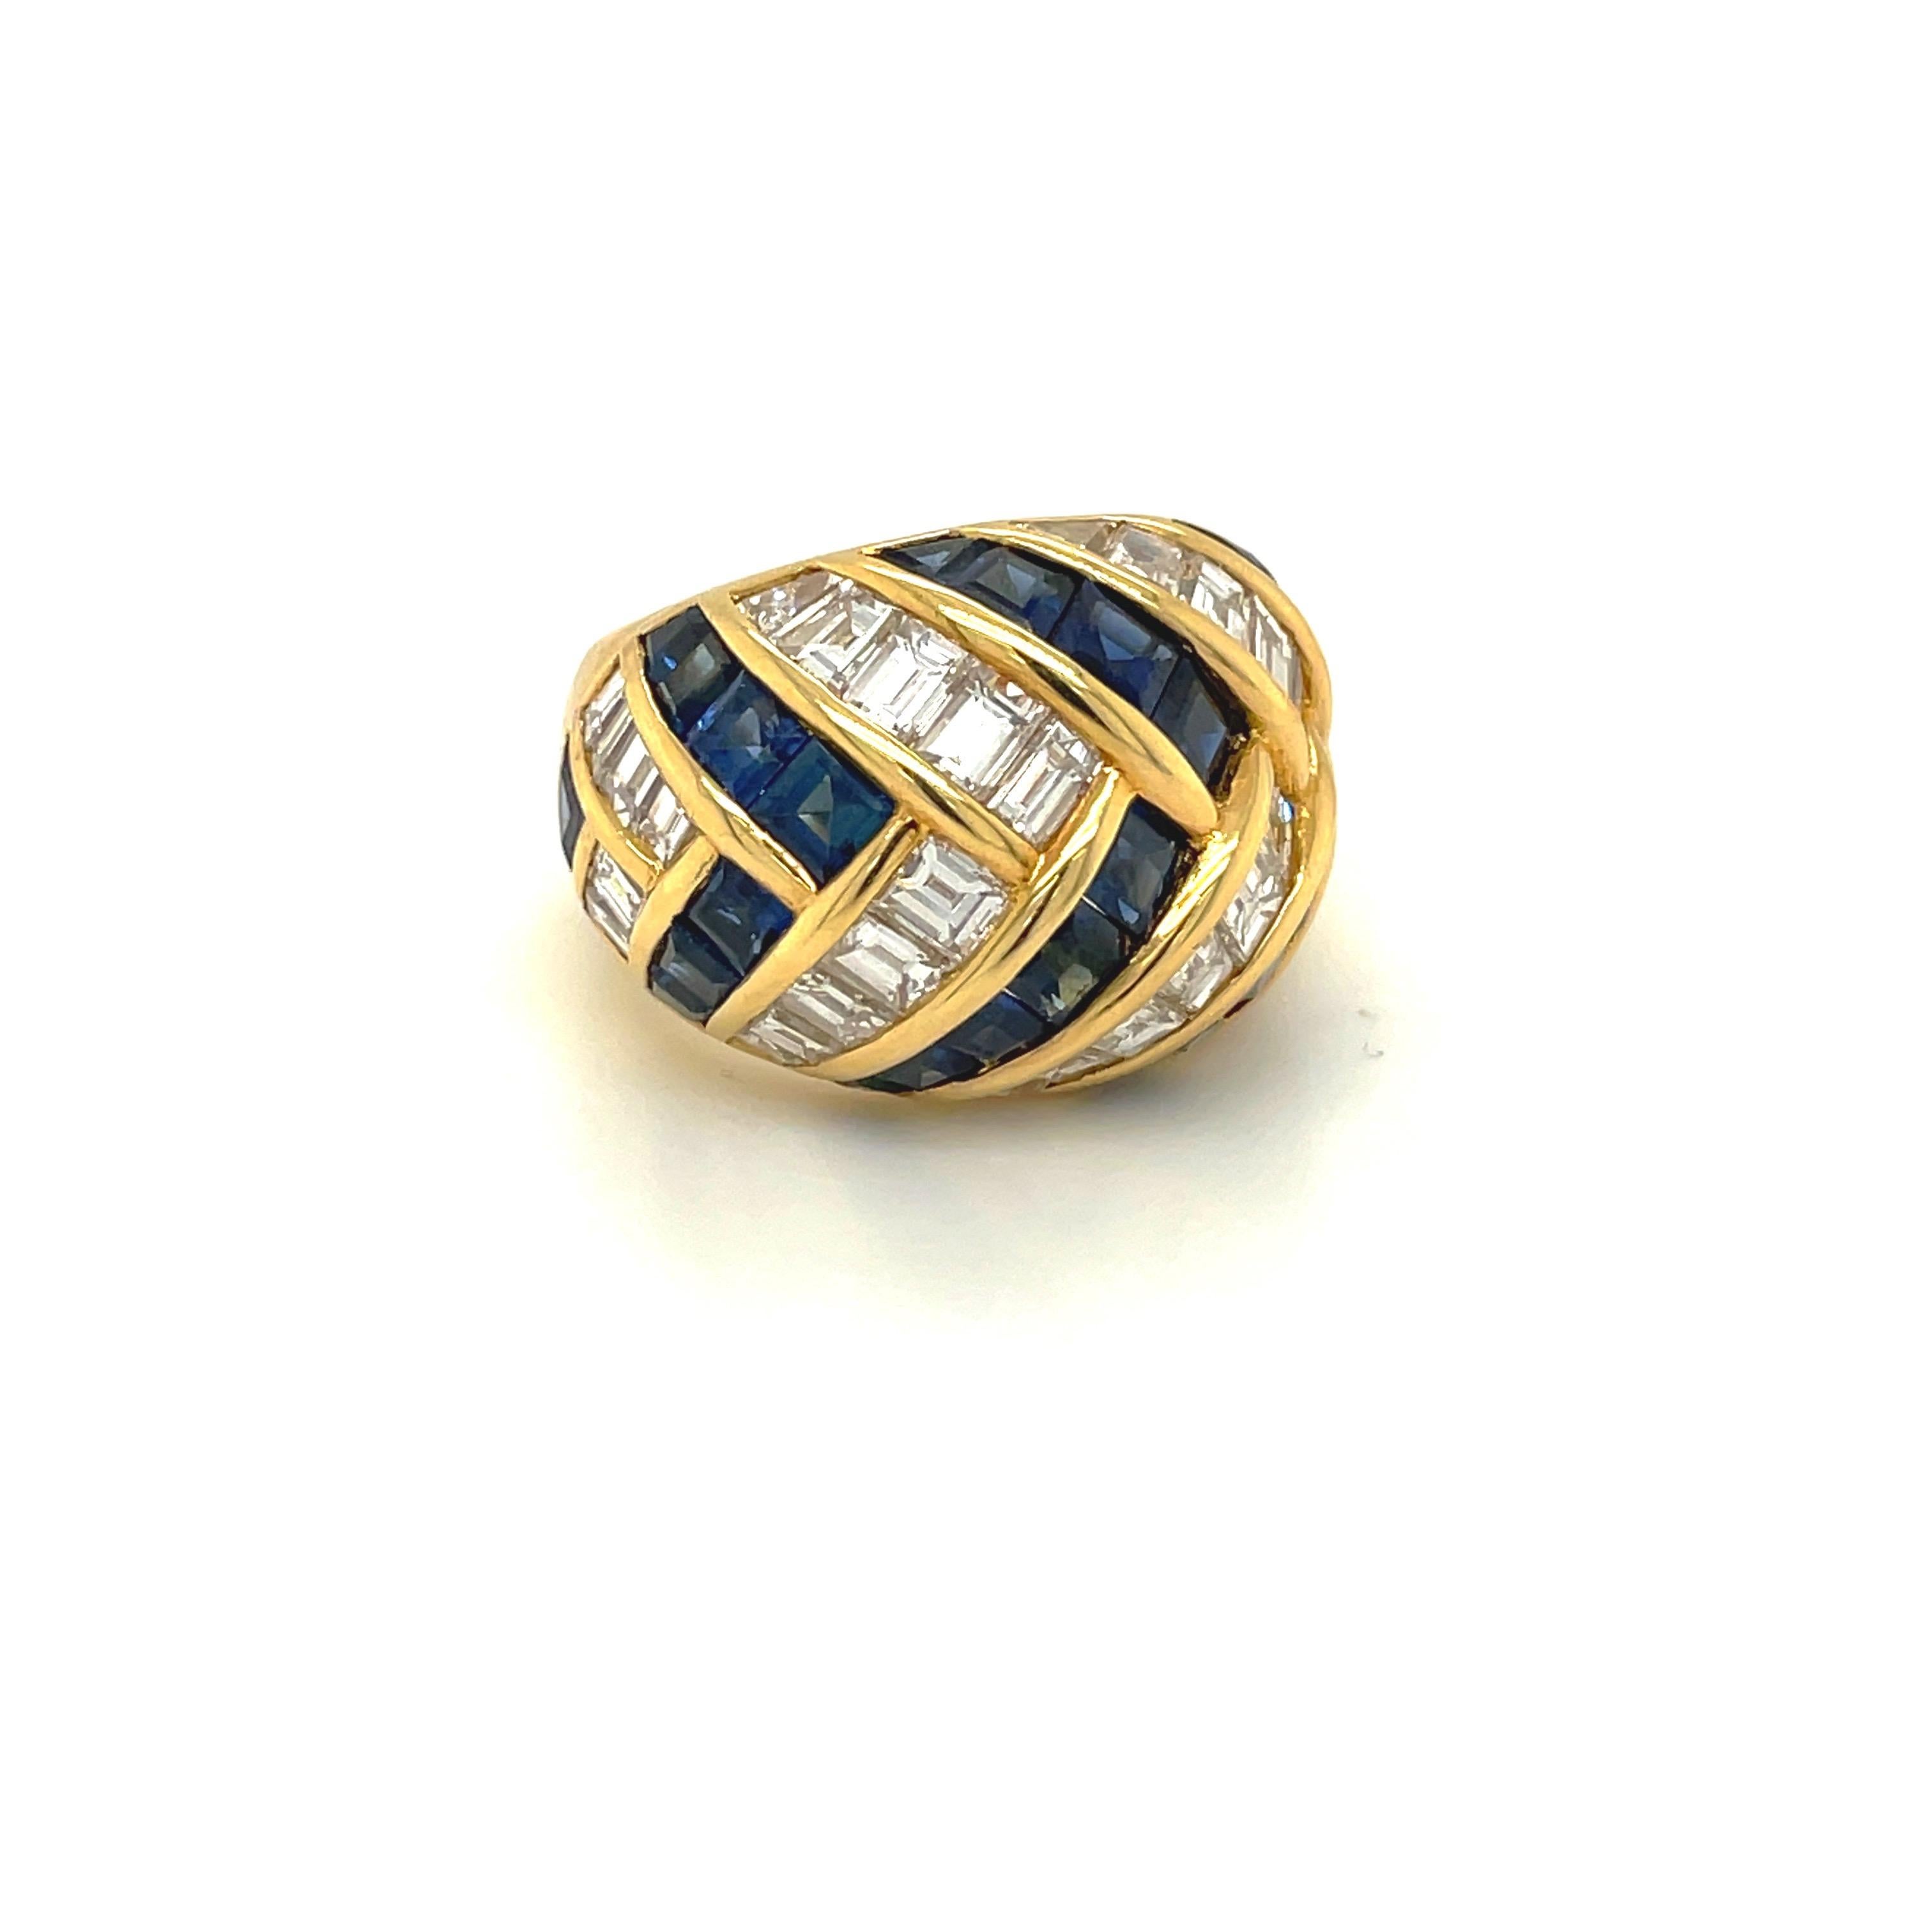 Contemporary Picchiotti 18 Karat Gold 4.09 Carat Diamond and 4.67 Carat Sapphire Dome Ring For Sale